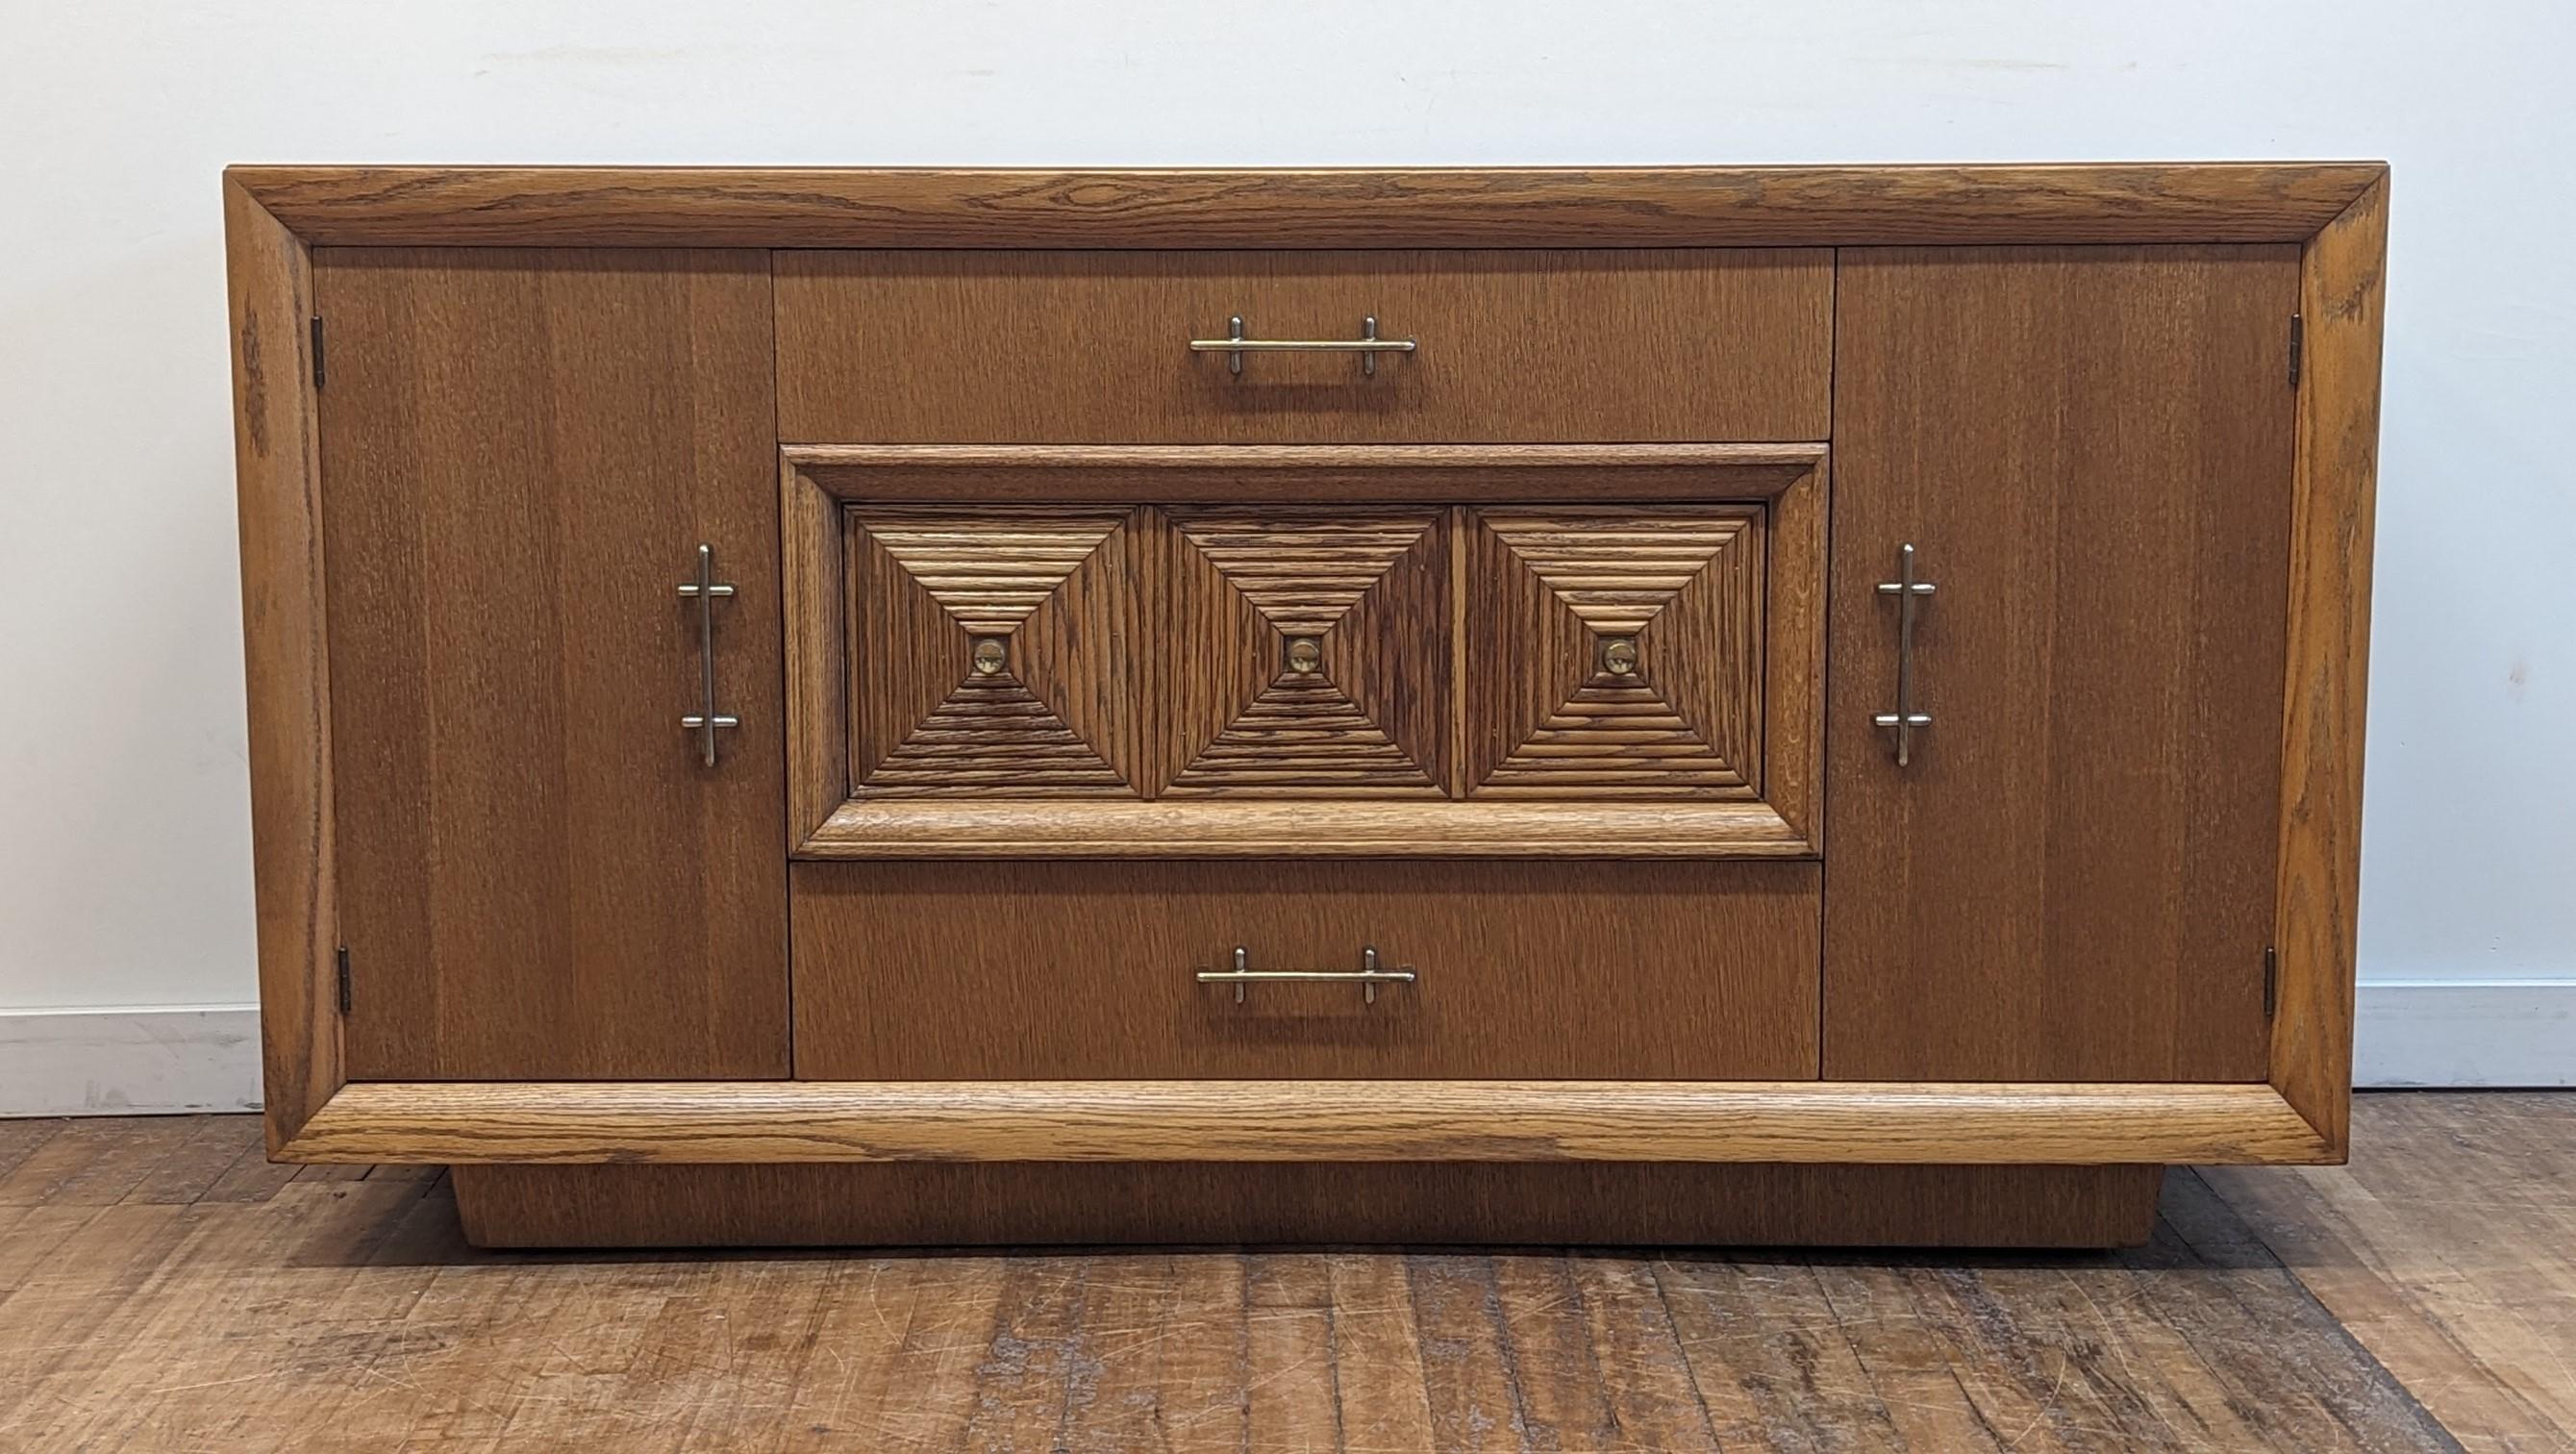 Mid Century Art Deco Credenza Sideboard after Maxime Old.  Cerused Oak Credenza Sideboard French Art Deco style after Maxime Old. Quality made Credenza of Cerused Oak with squared dimensional door medallions and solid brass pulls. Raised on a plinth